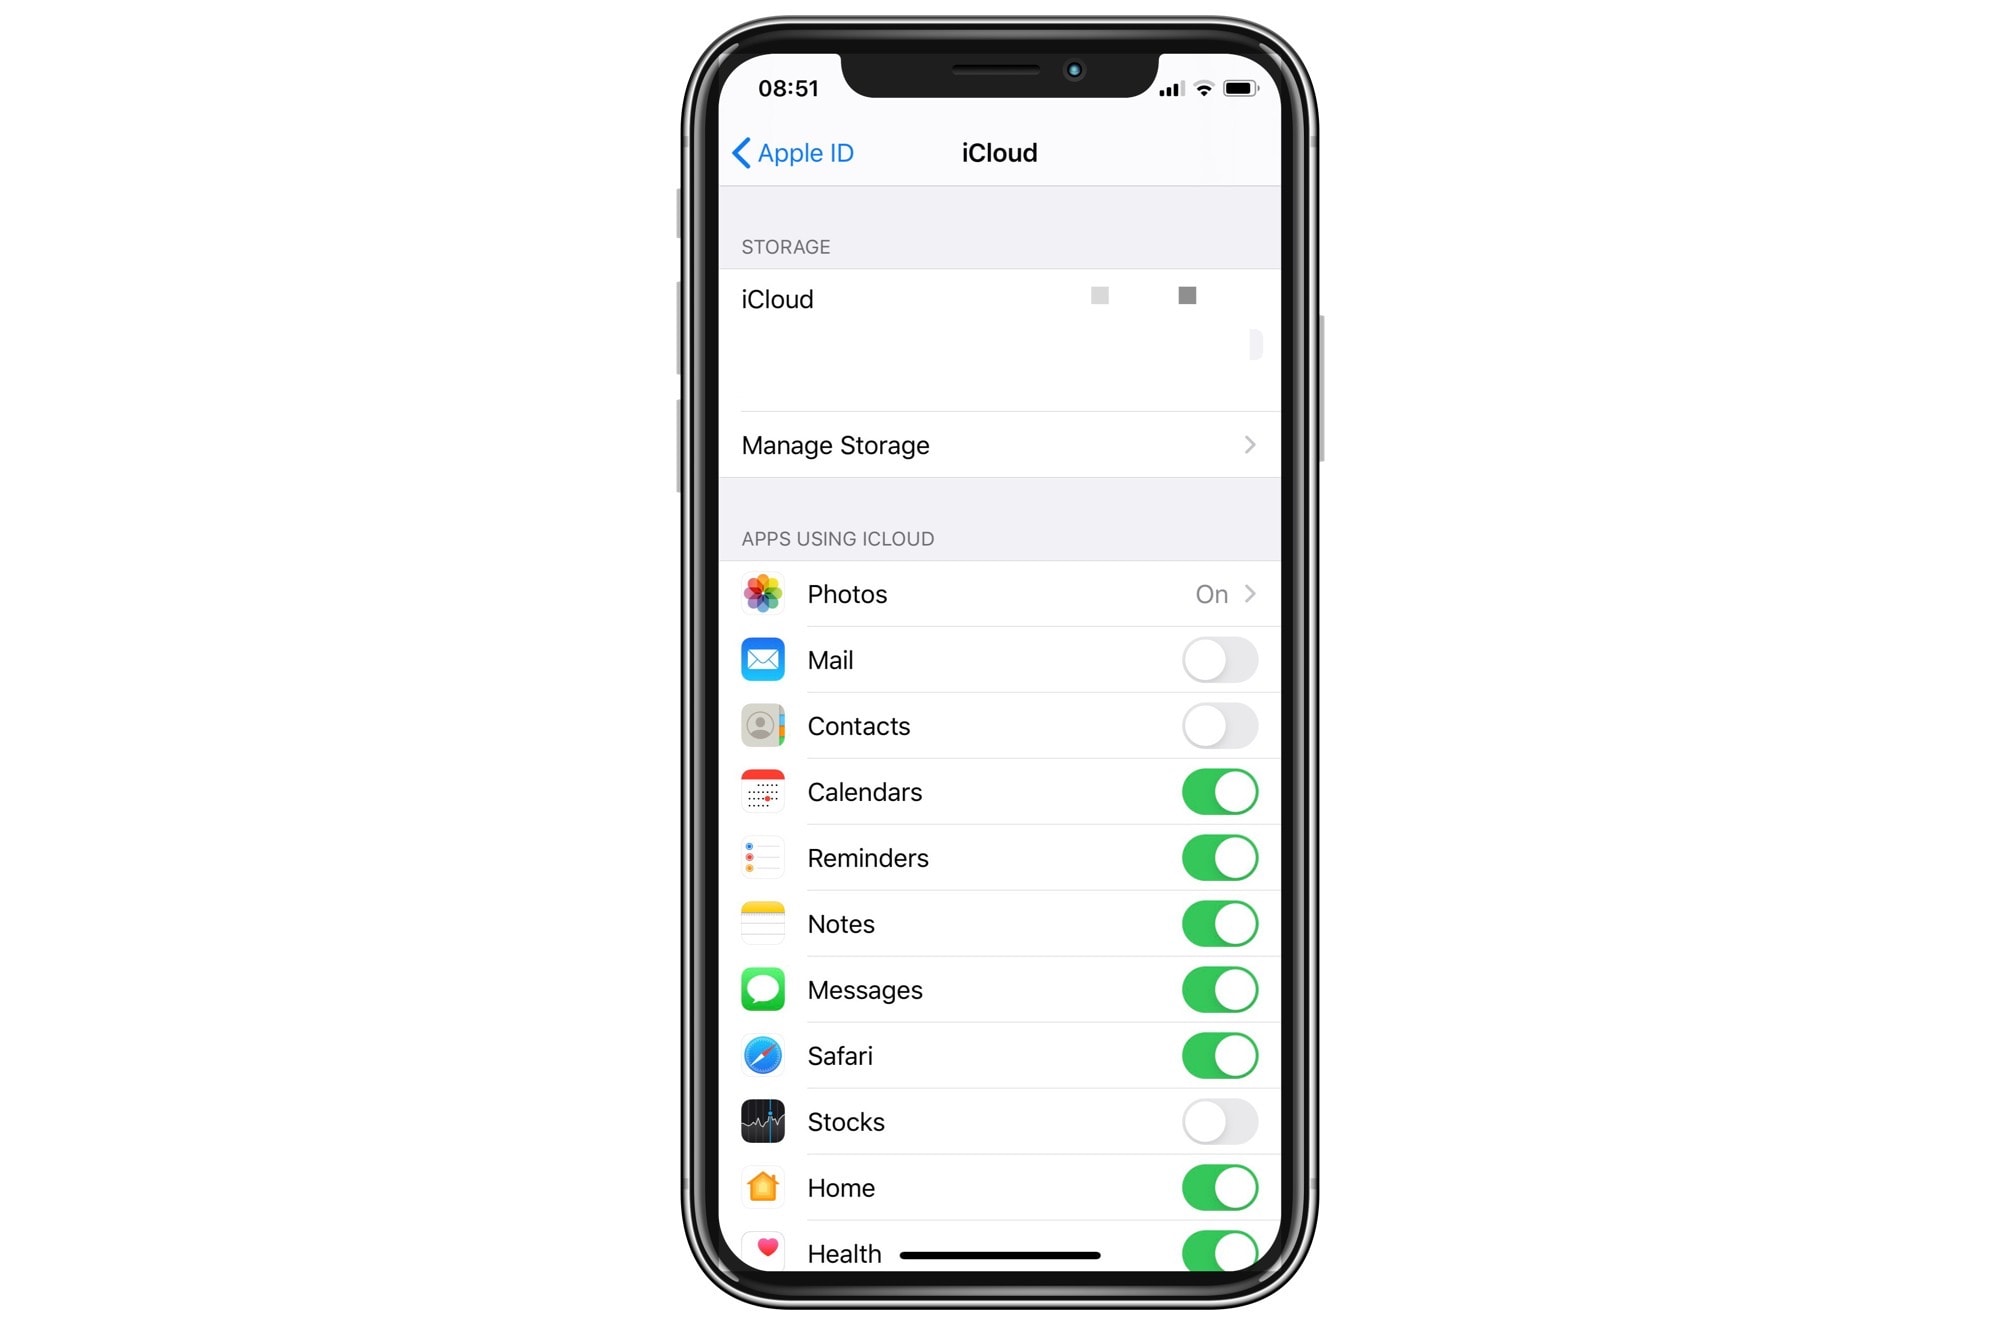 Find your iCloud backups in the Settings app.